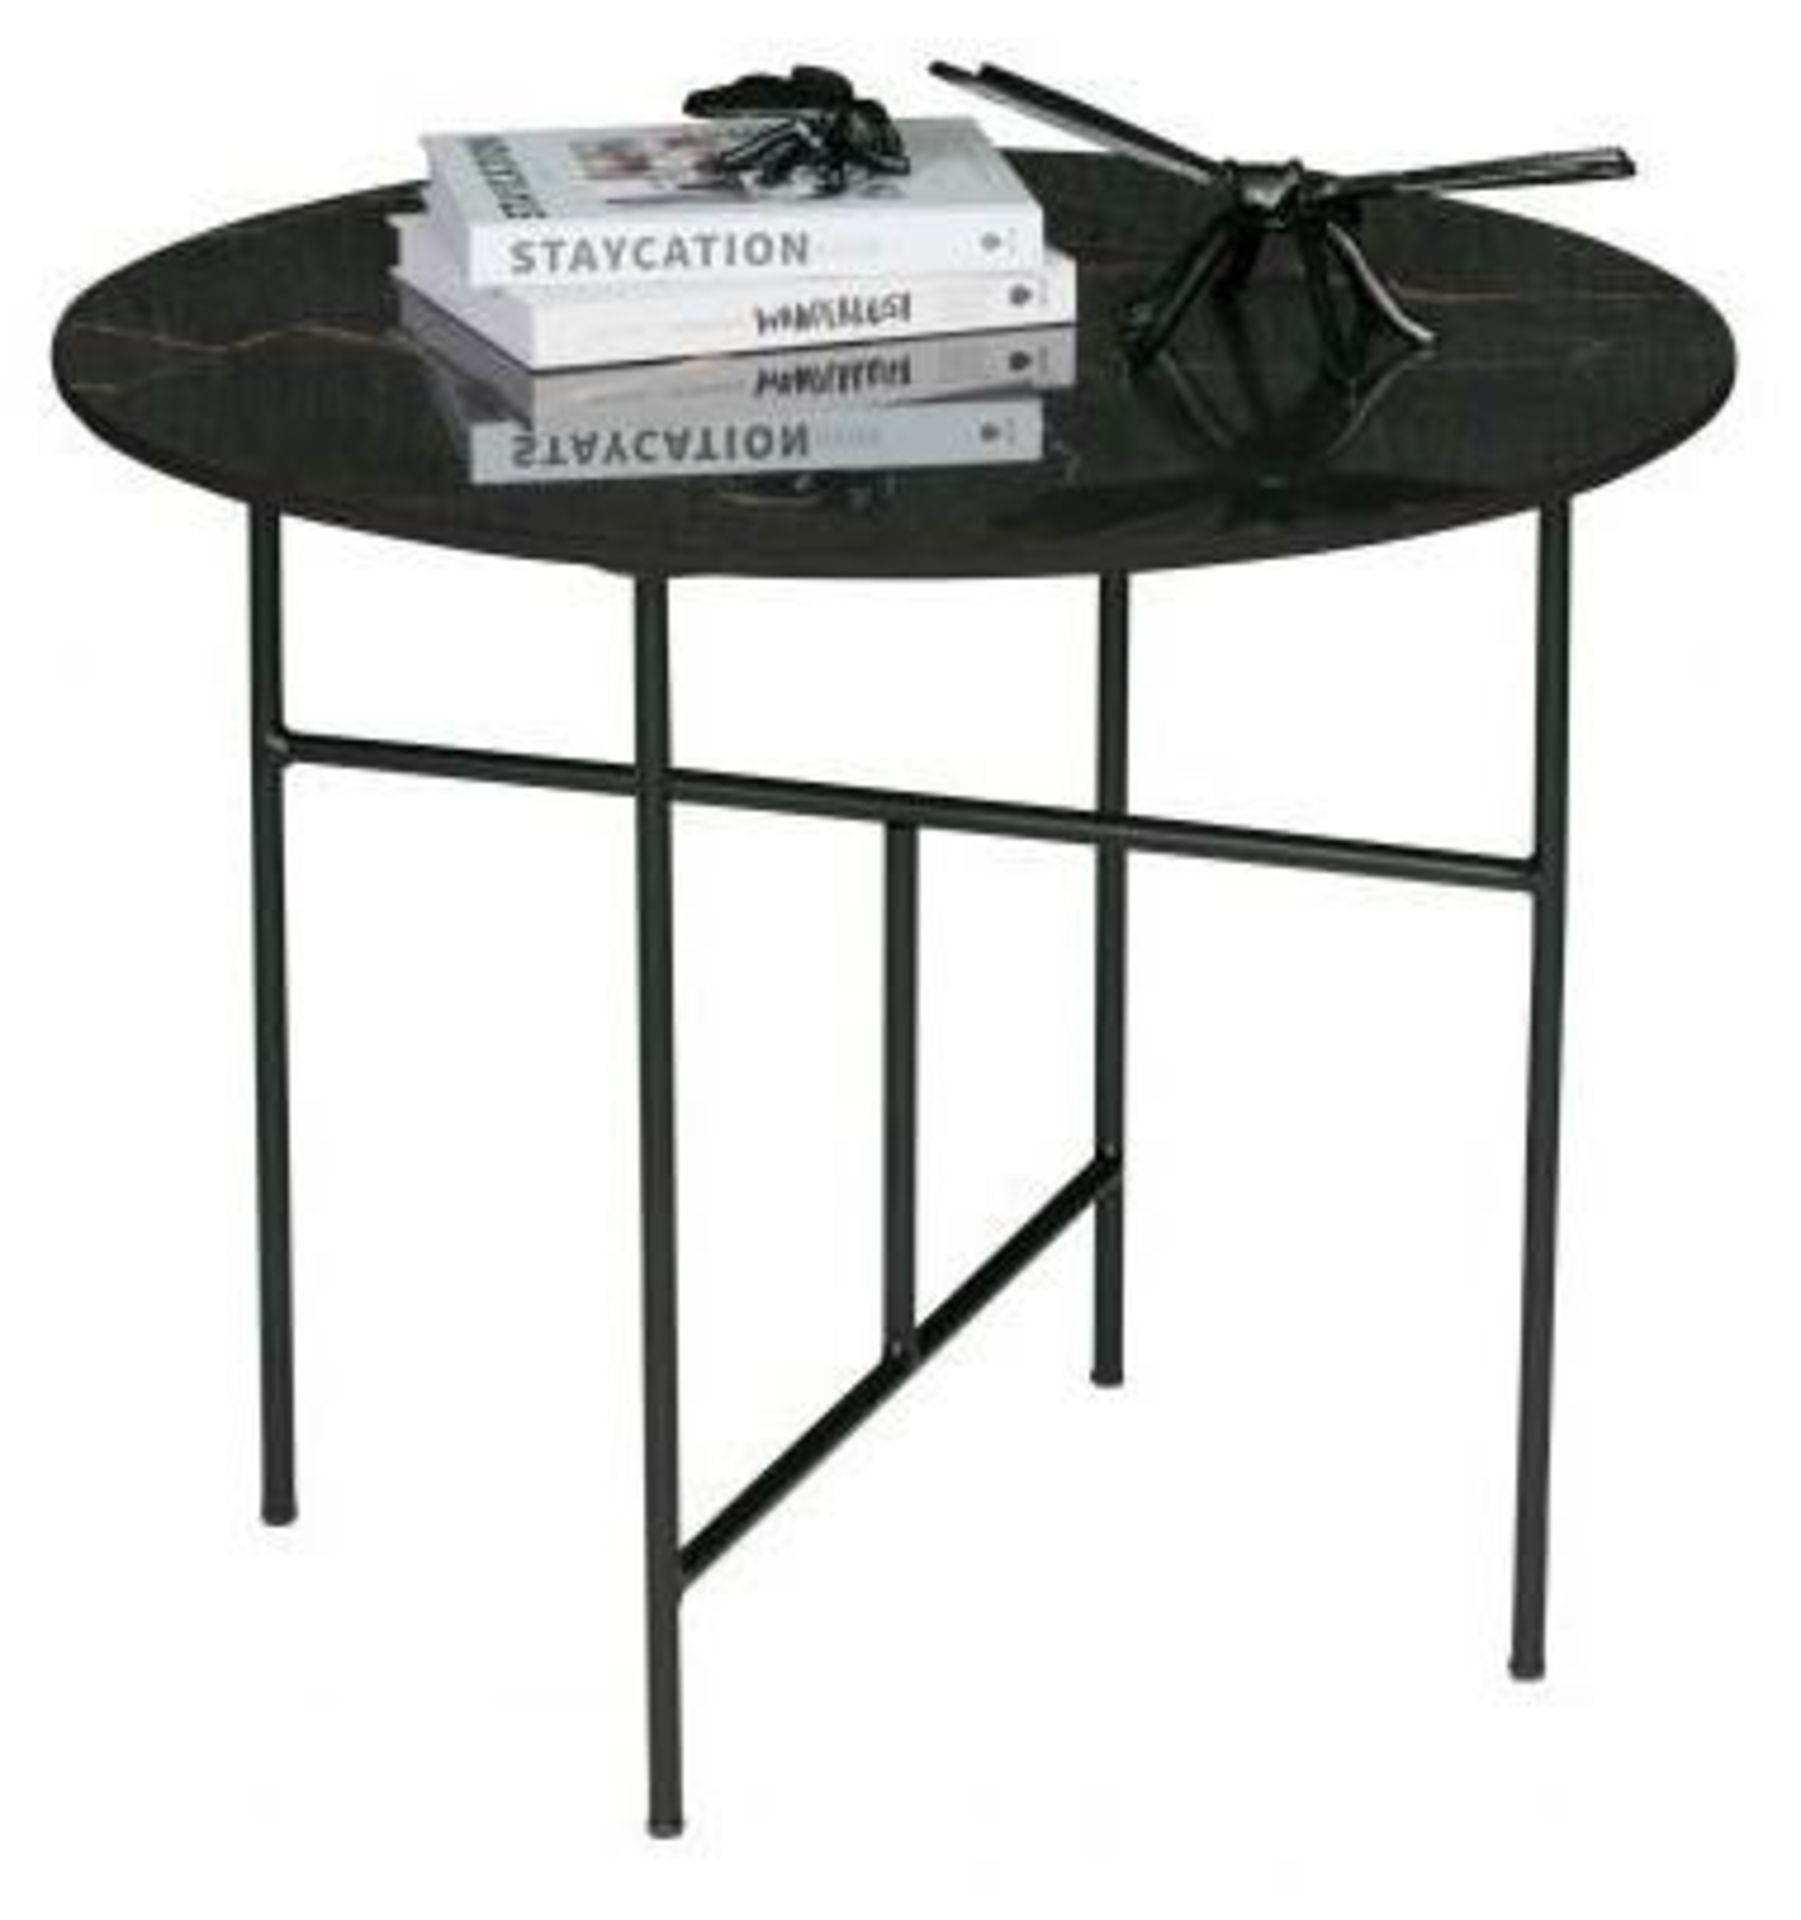 1 x VIDA Modern Round Coffee Table Featuring A Black Marbled Porcelain Tabletop - Produced By WOOOD - Image 3 of 4